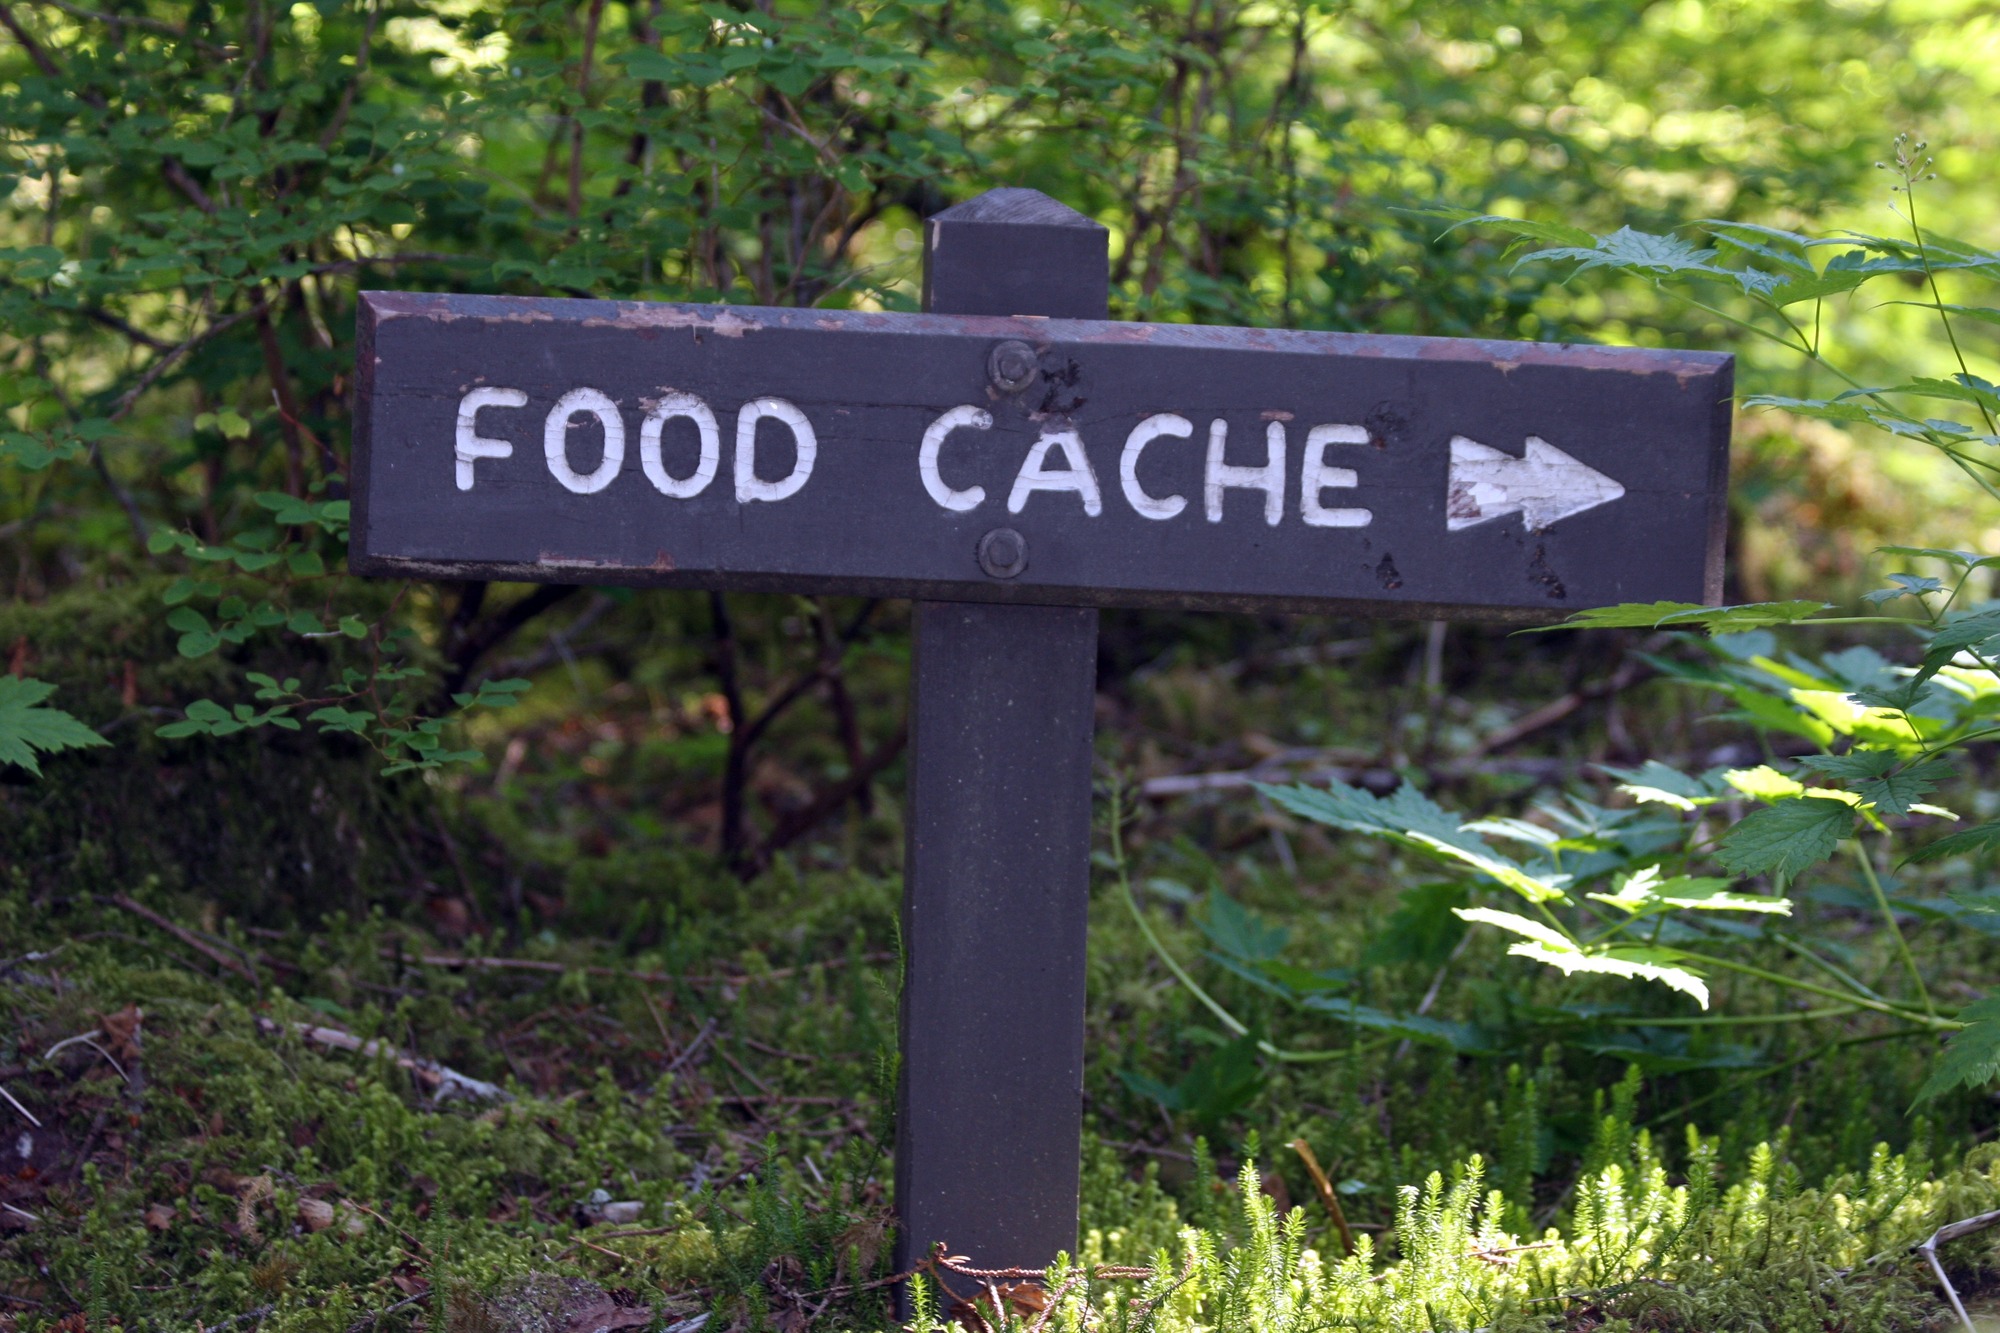 A small sign sticks out the ground. It has the words "Food Cache" engraved on it. It indicated the direction to the cache.